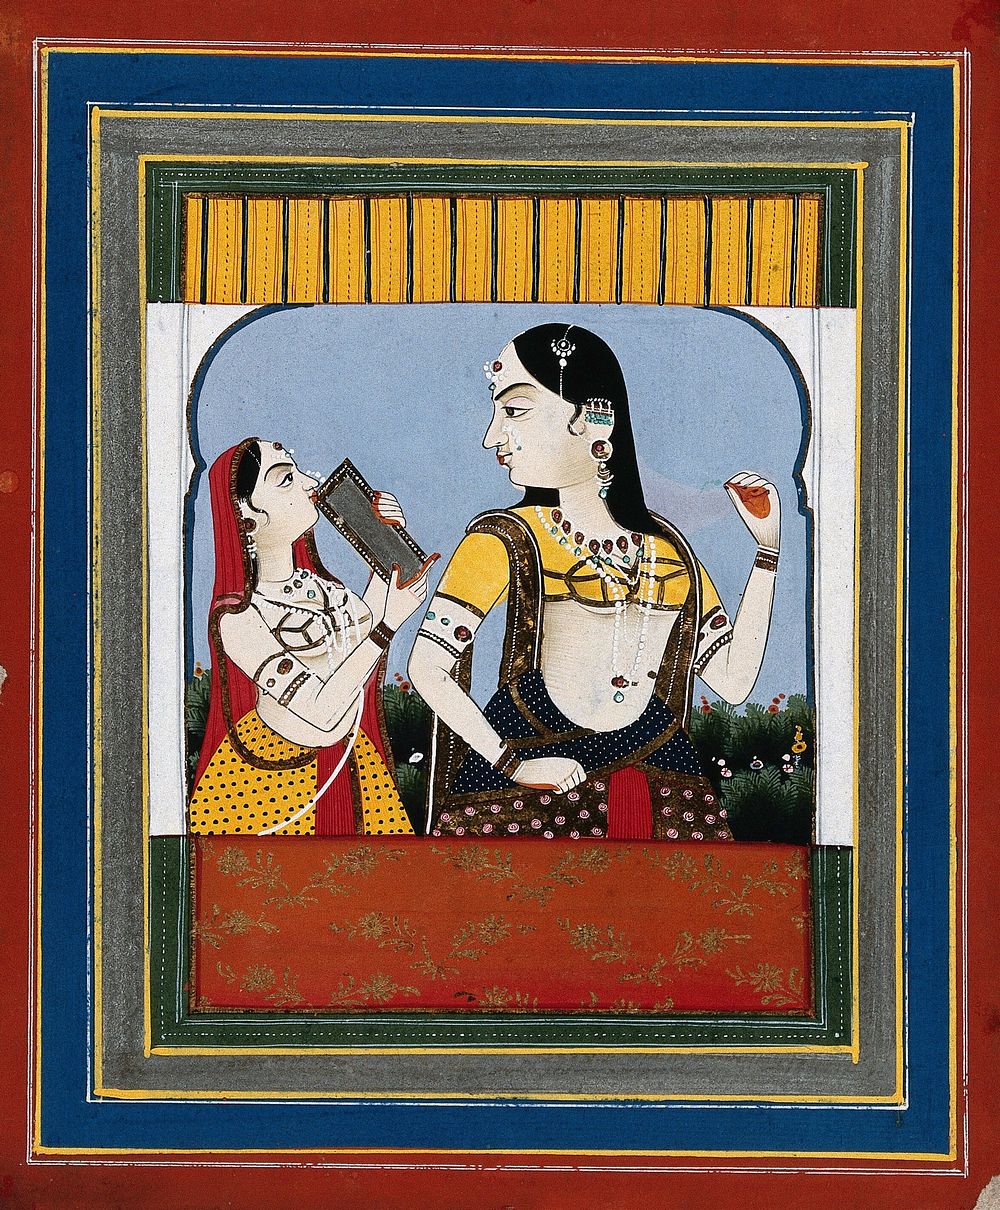 An Indian lady looking into a small mirror held by another woman. Gouache painting by an Indian painter.